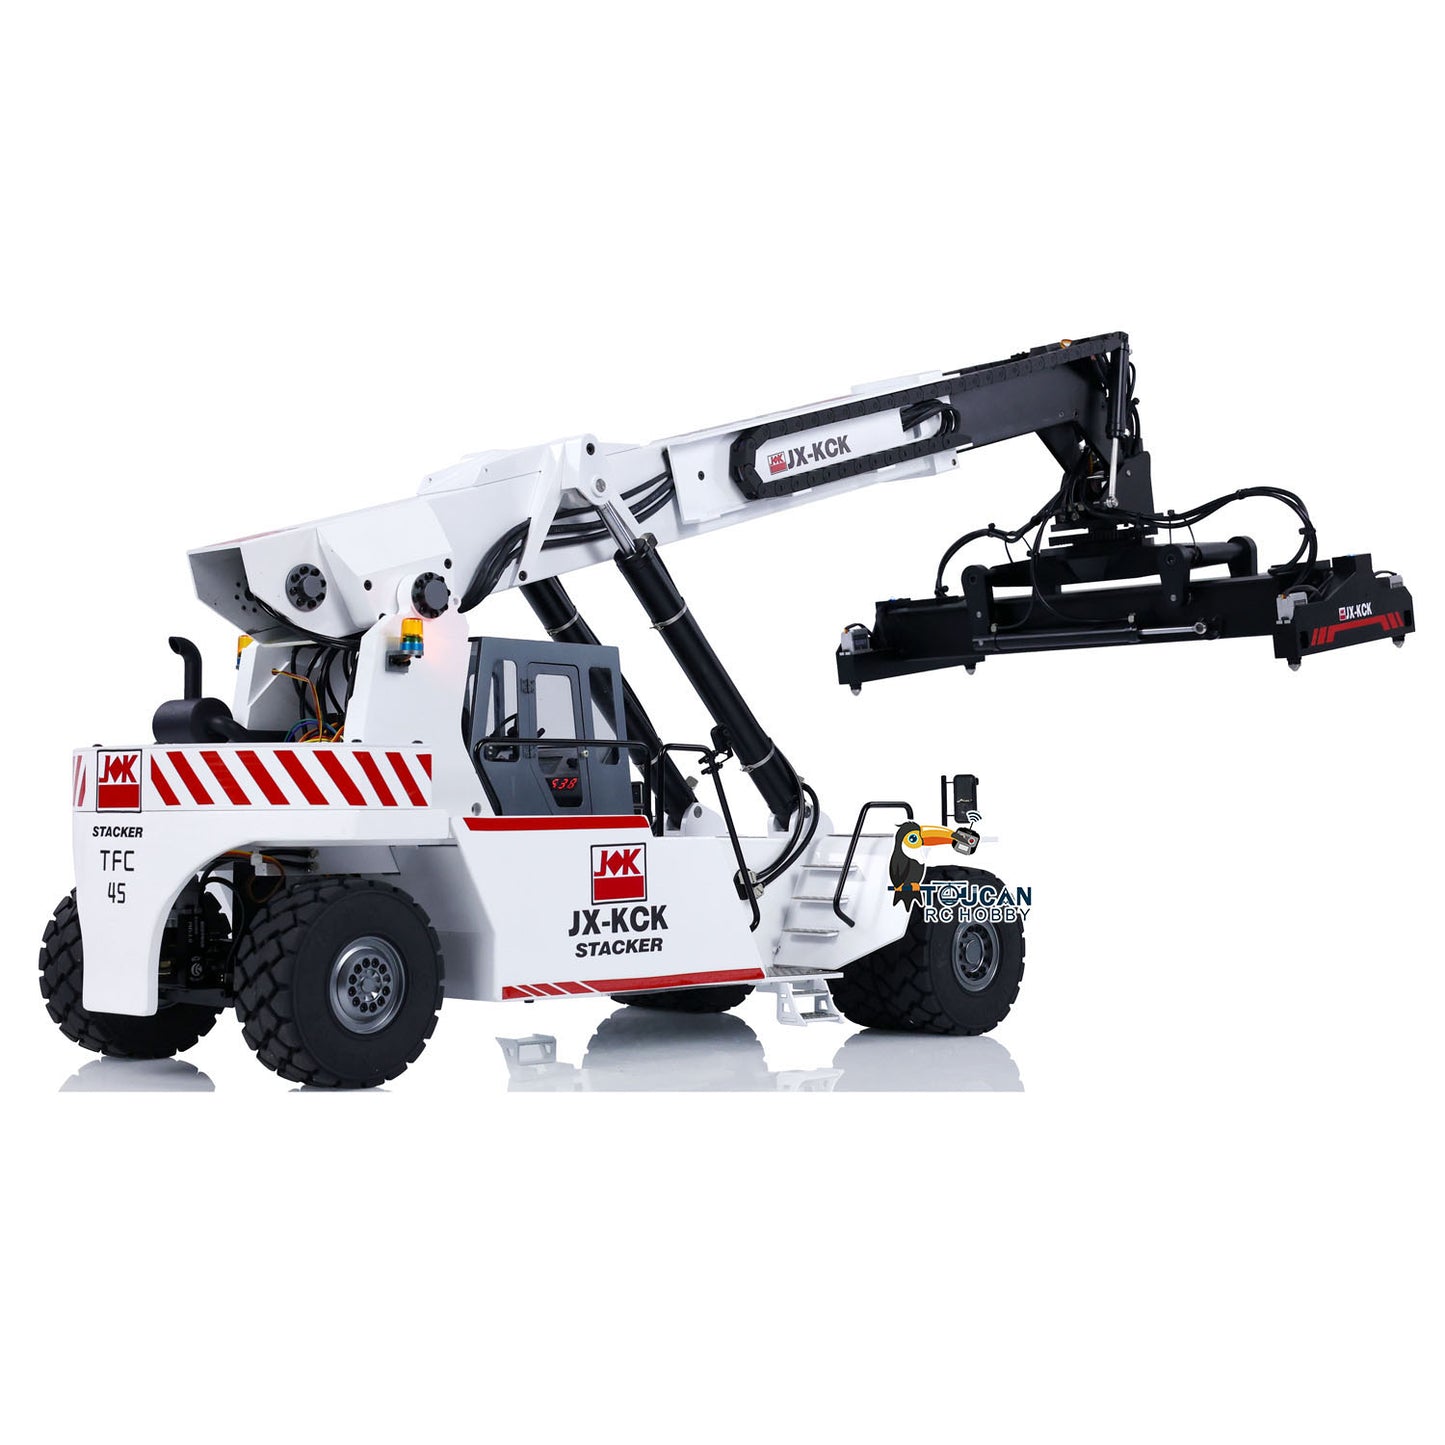 JX-KCK TFC45 1/14 RC Hydraulic Frontal Crane Reach Stacker Radio Control Container Handler Painted Assembled Model PNP Version